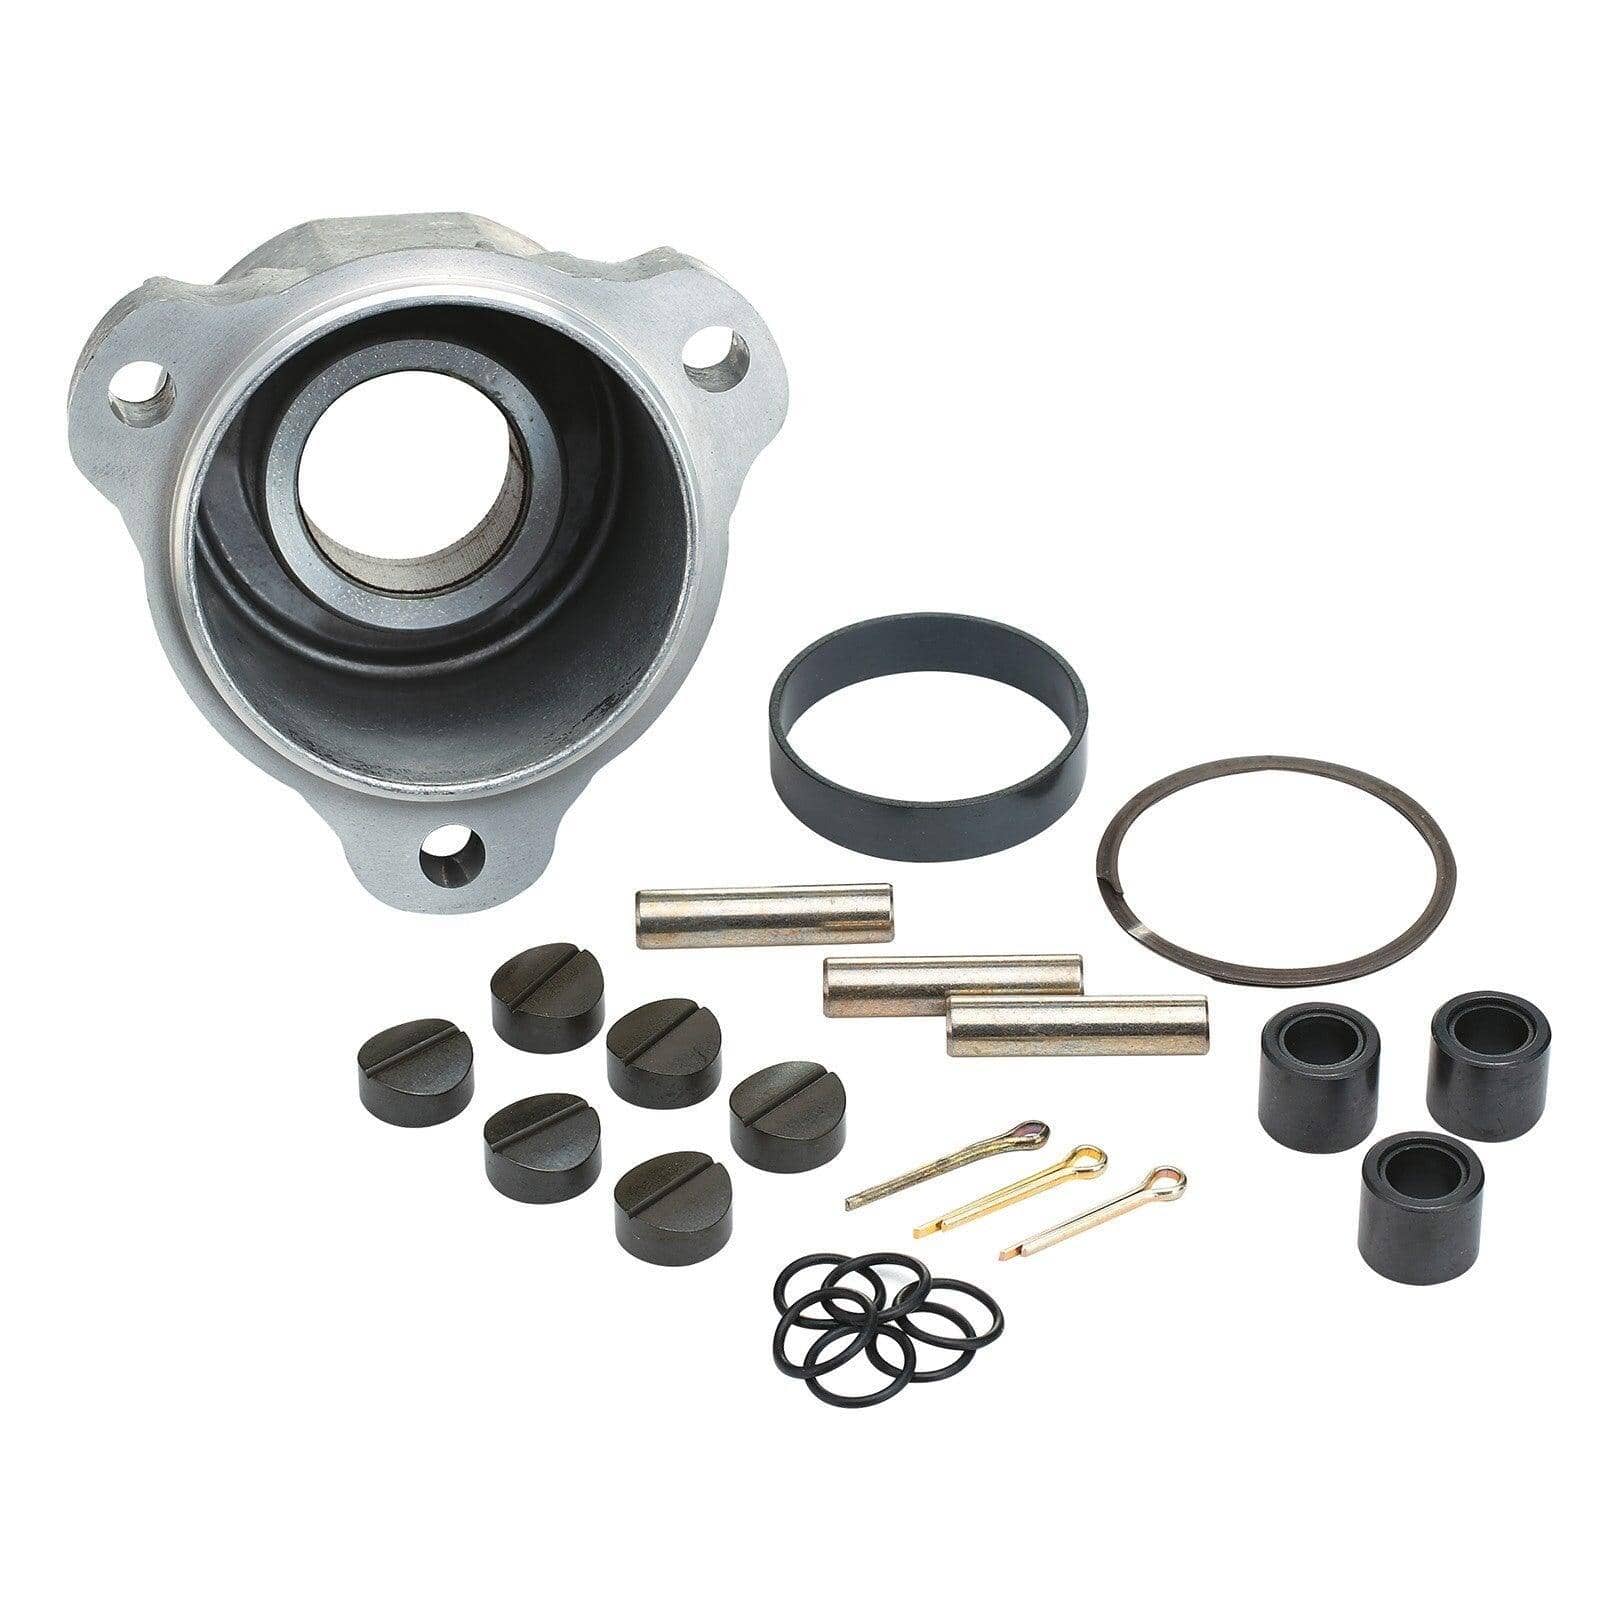 Maintenance Kit for TRA Drive Pulley - 2011 (550F), 2011 to 2018 (600 & 600 E-TEC sea-level) - Factory Recreation